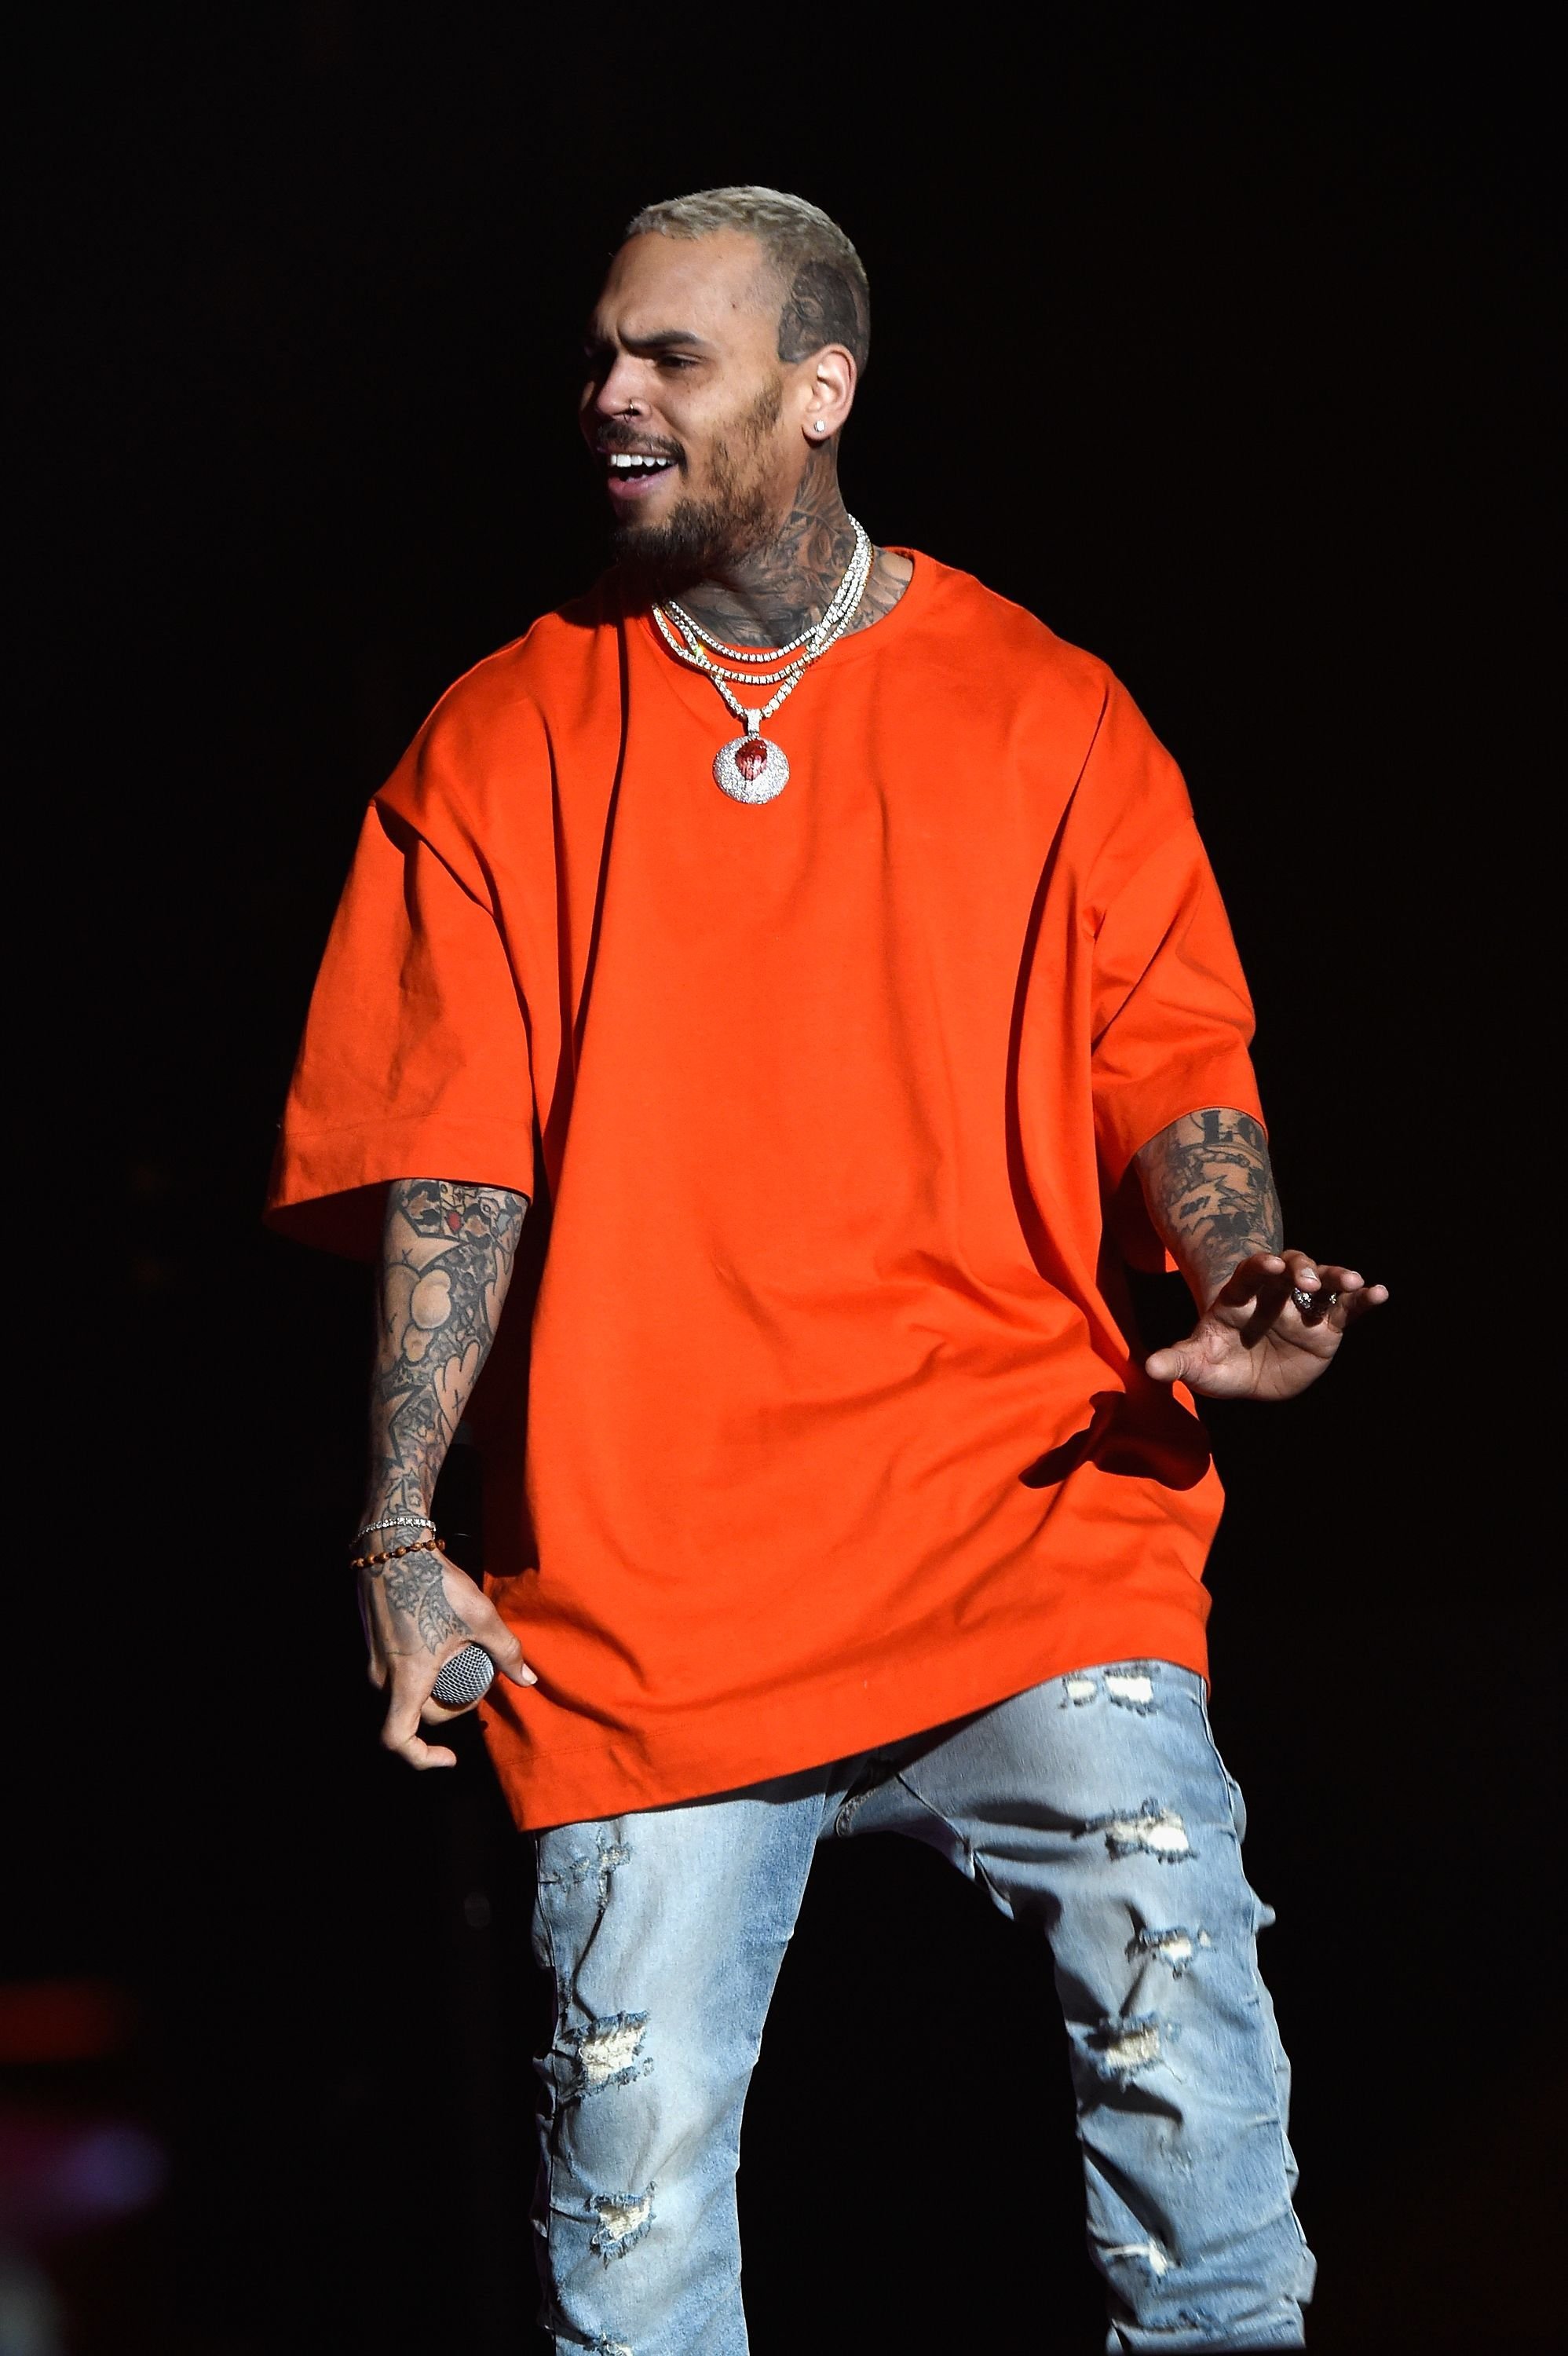 Chris Brown on stage at Demi Lovato's "Tell Me You Love Me" World Tour at The Forum on March 2, 2018. | Source: Getty Images